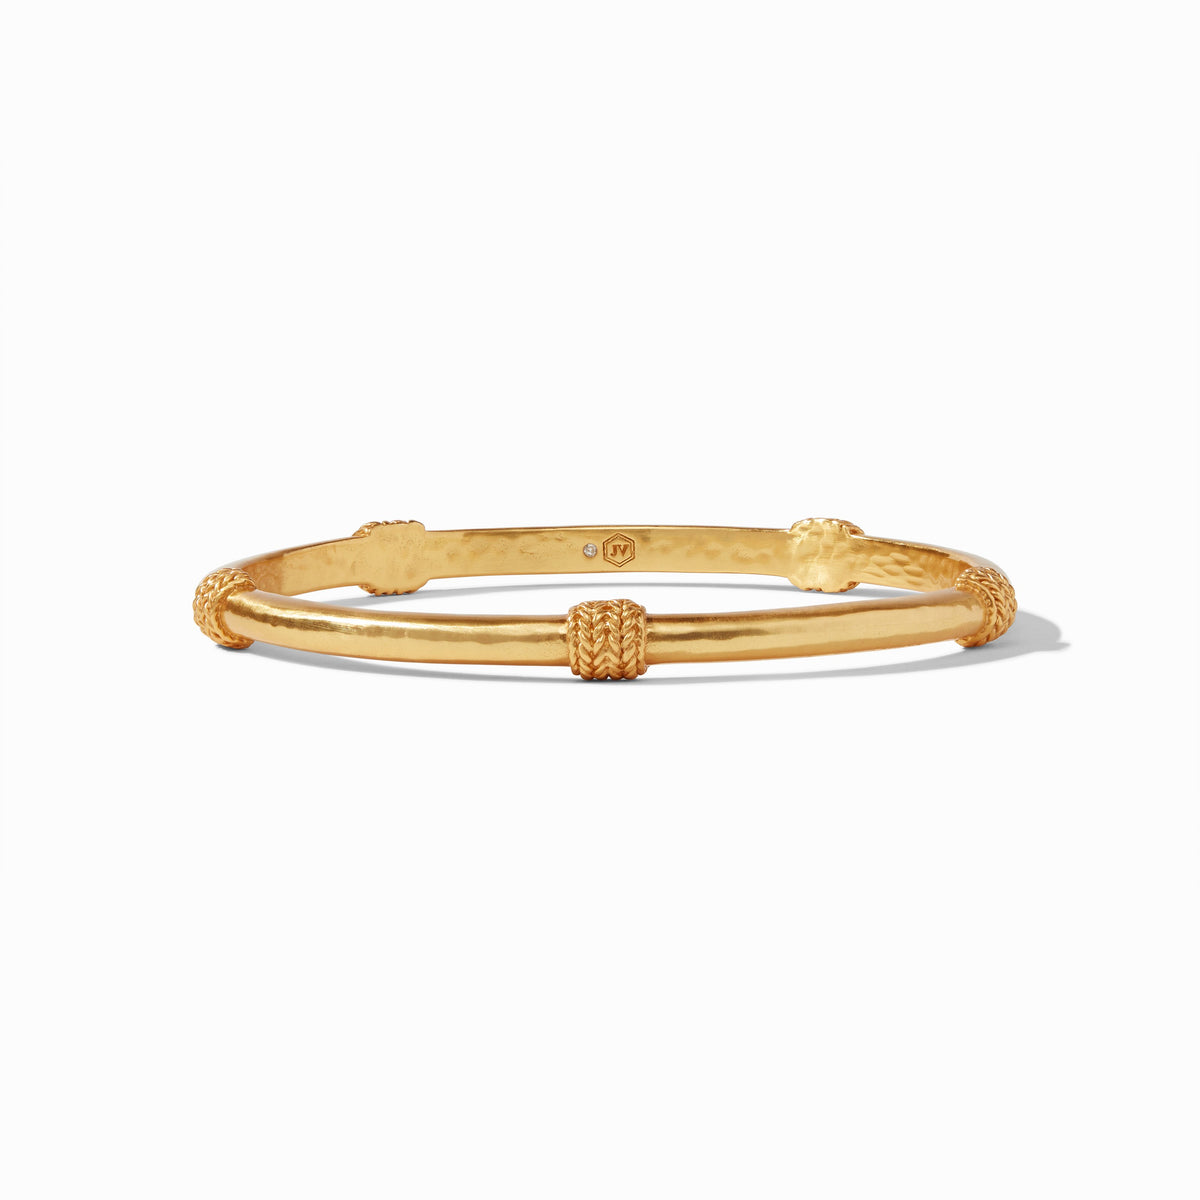 carousel, Centered view of Windsor Stacking Bangle in Gold